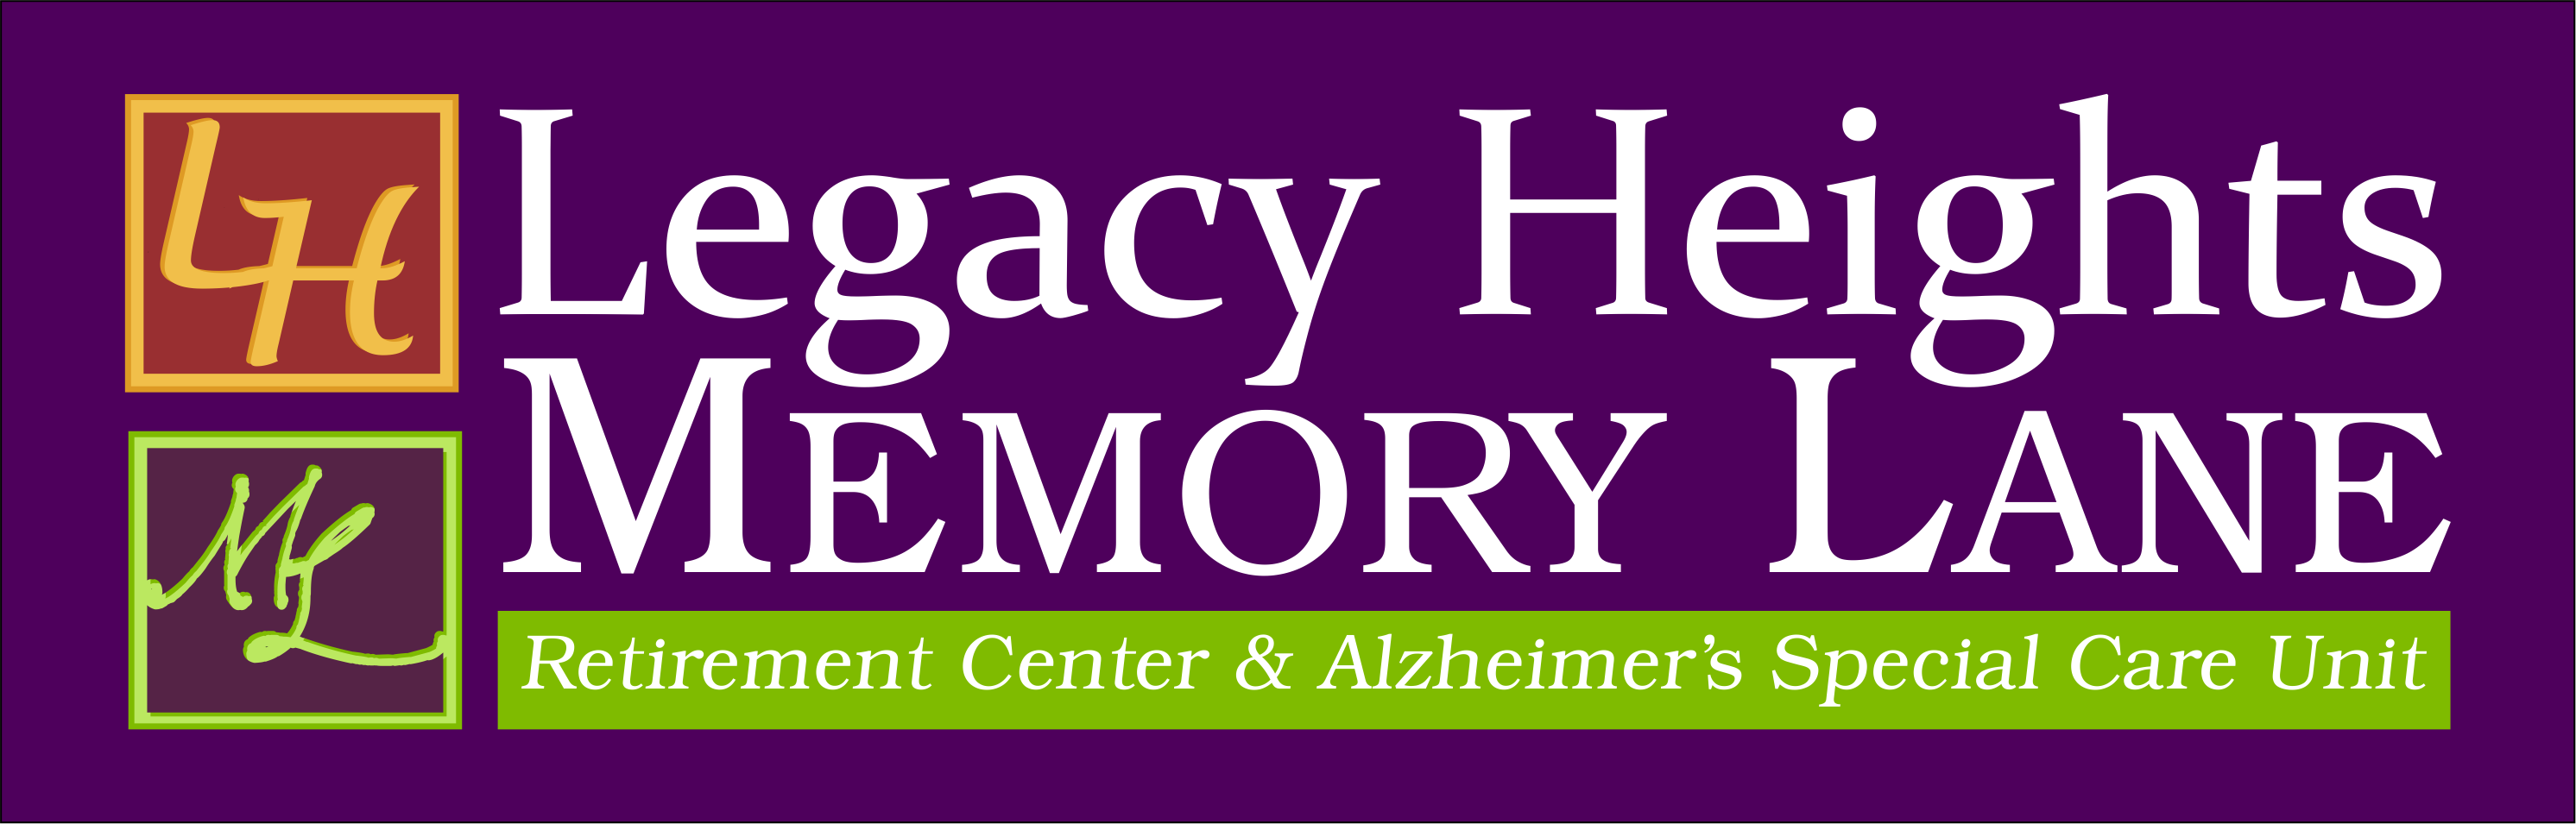 3. Memory Lane and Legacy Heights (Gold)